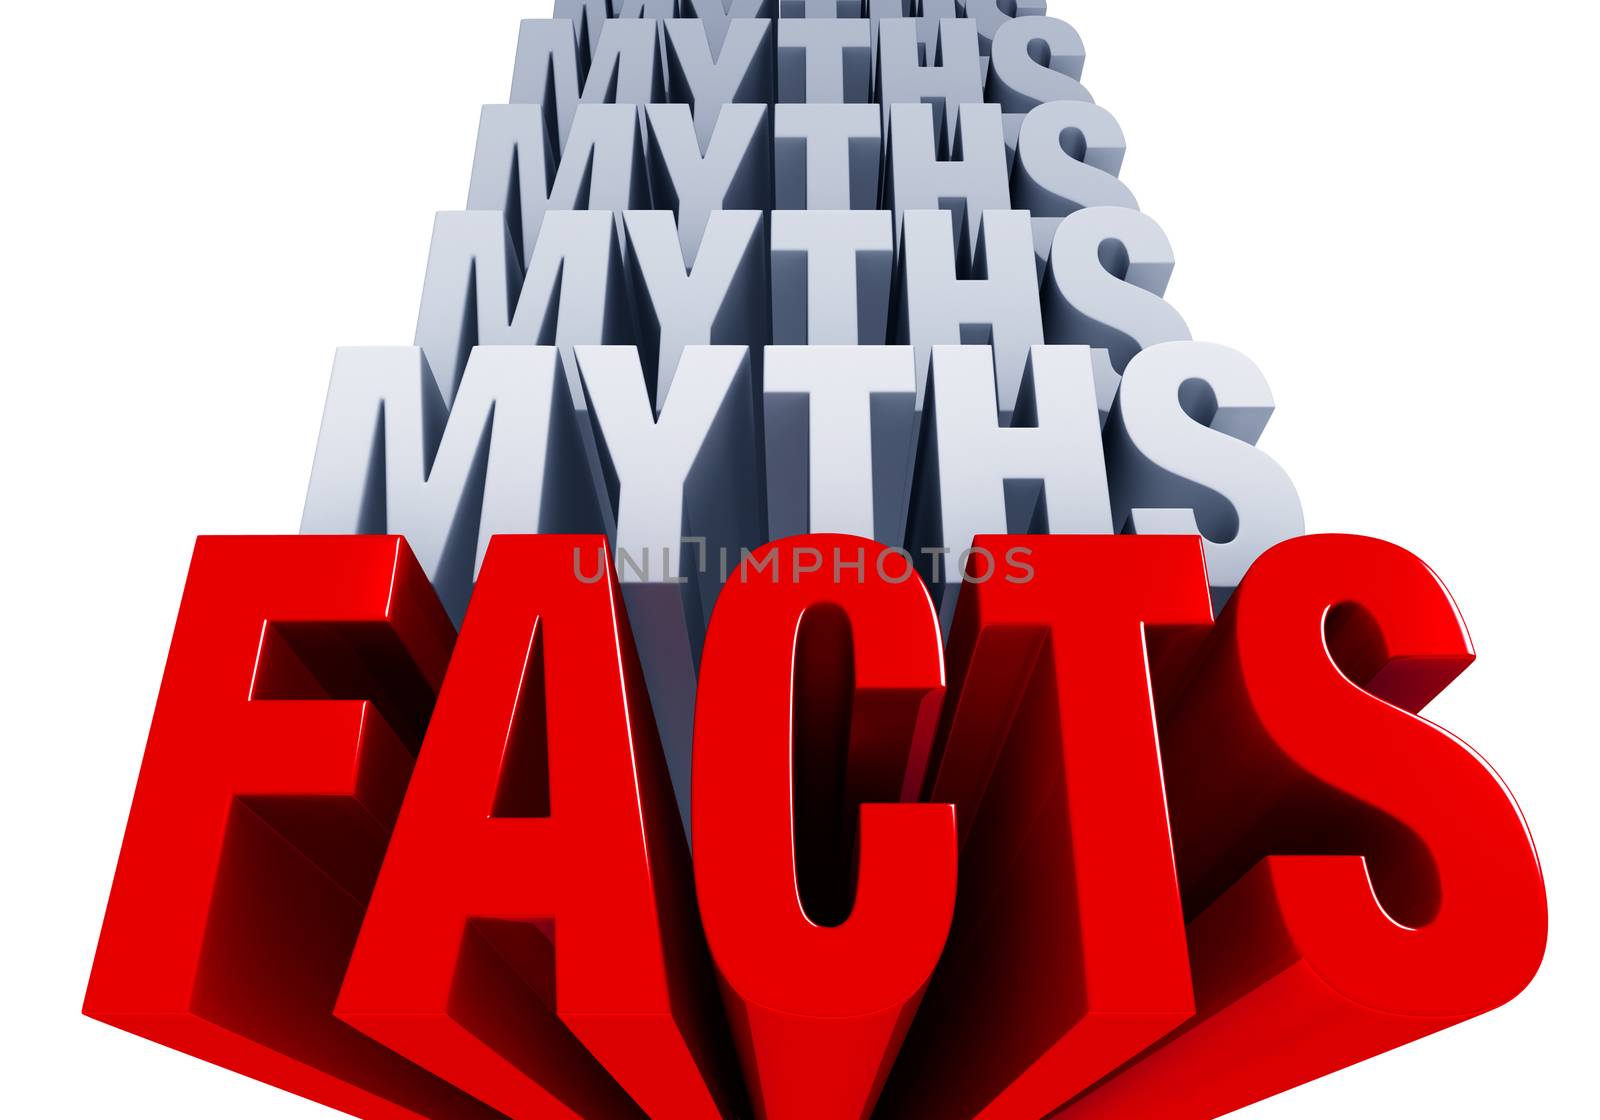 A shiny bold, red "FACTS" dominates the foreground with many layers of "MYTHS" in light blue gray stacked on top. Isolated on White.